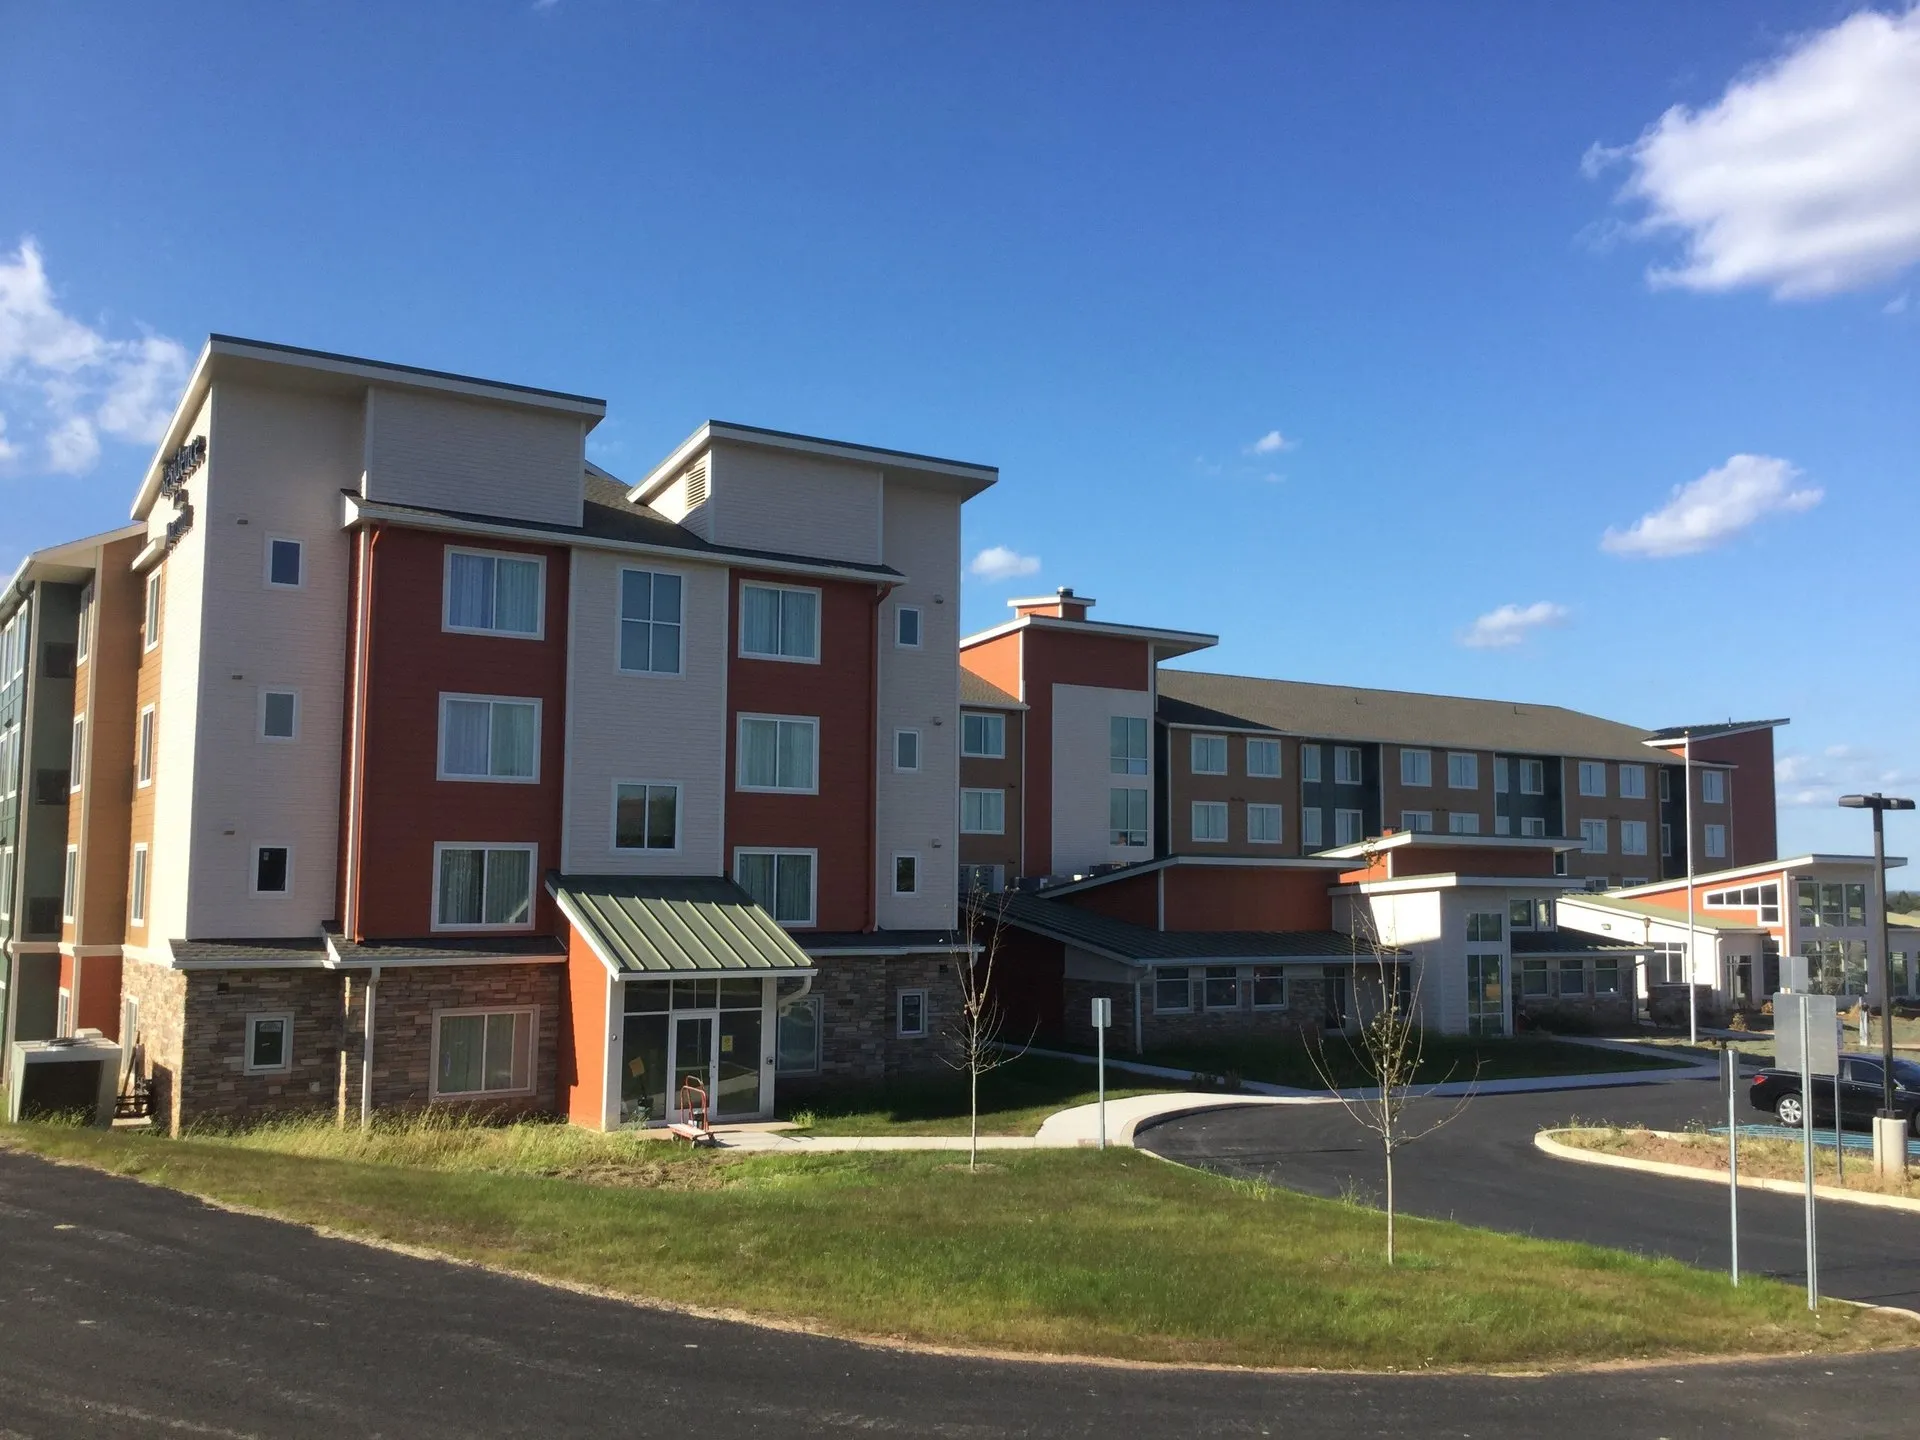 Residence Inn Hotel Collegeville PA finished